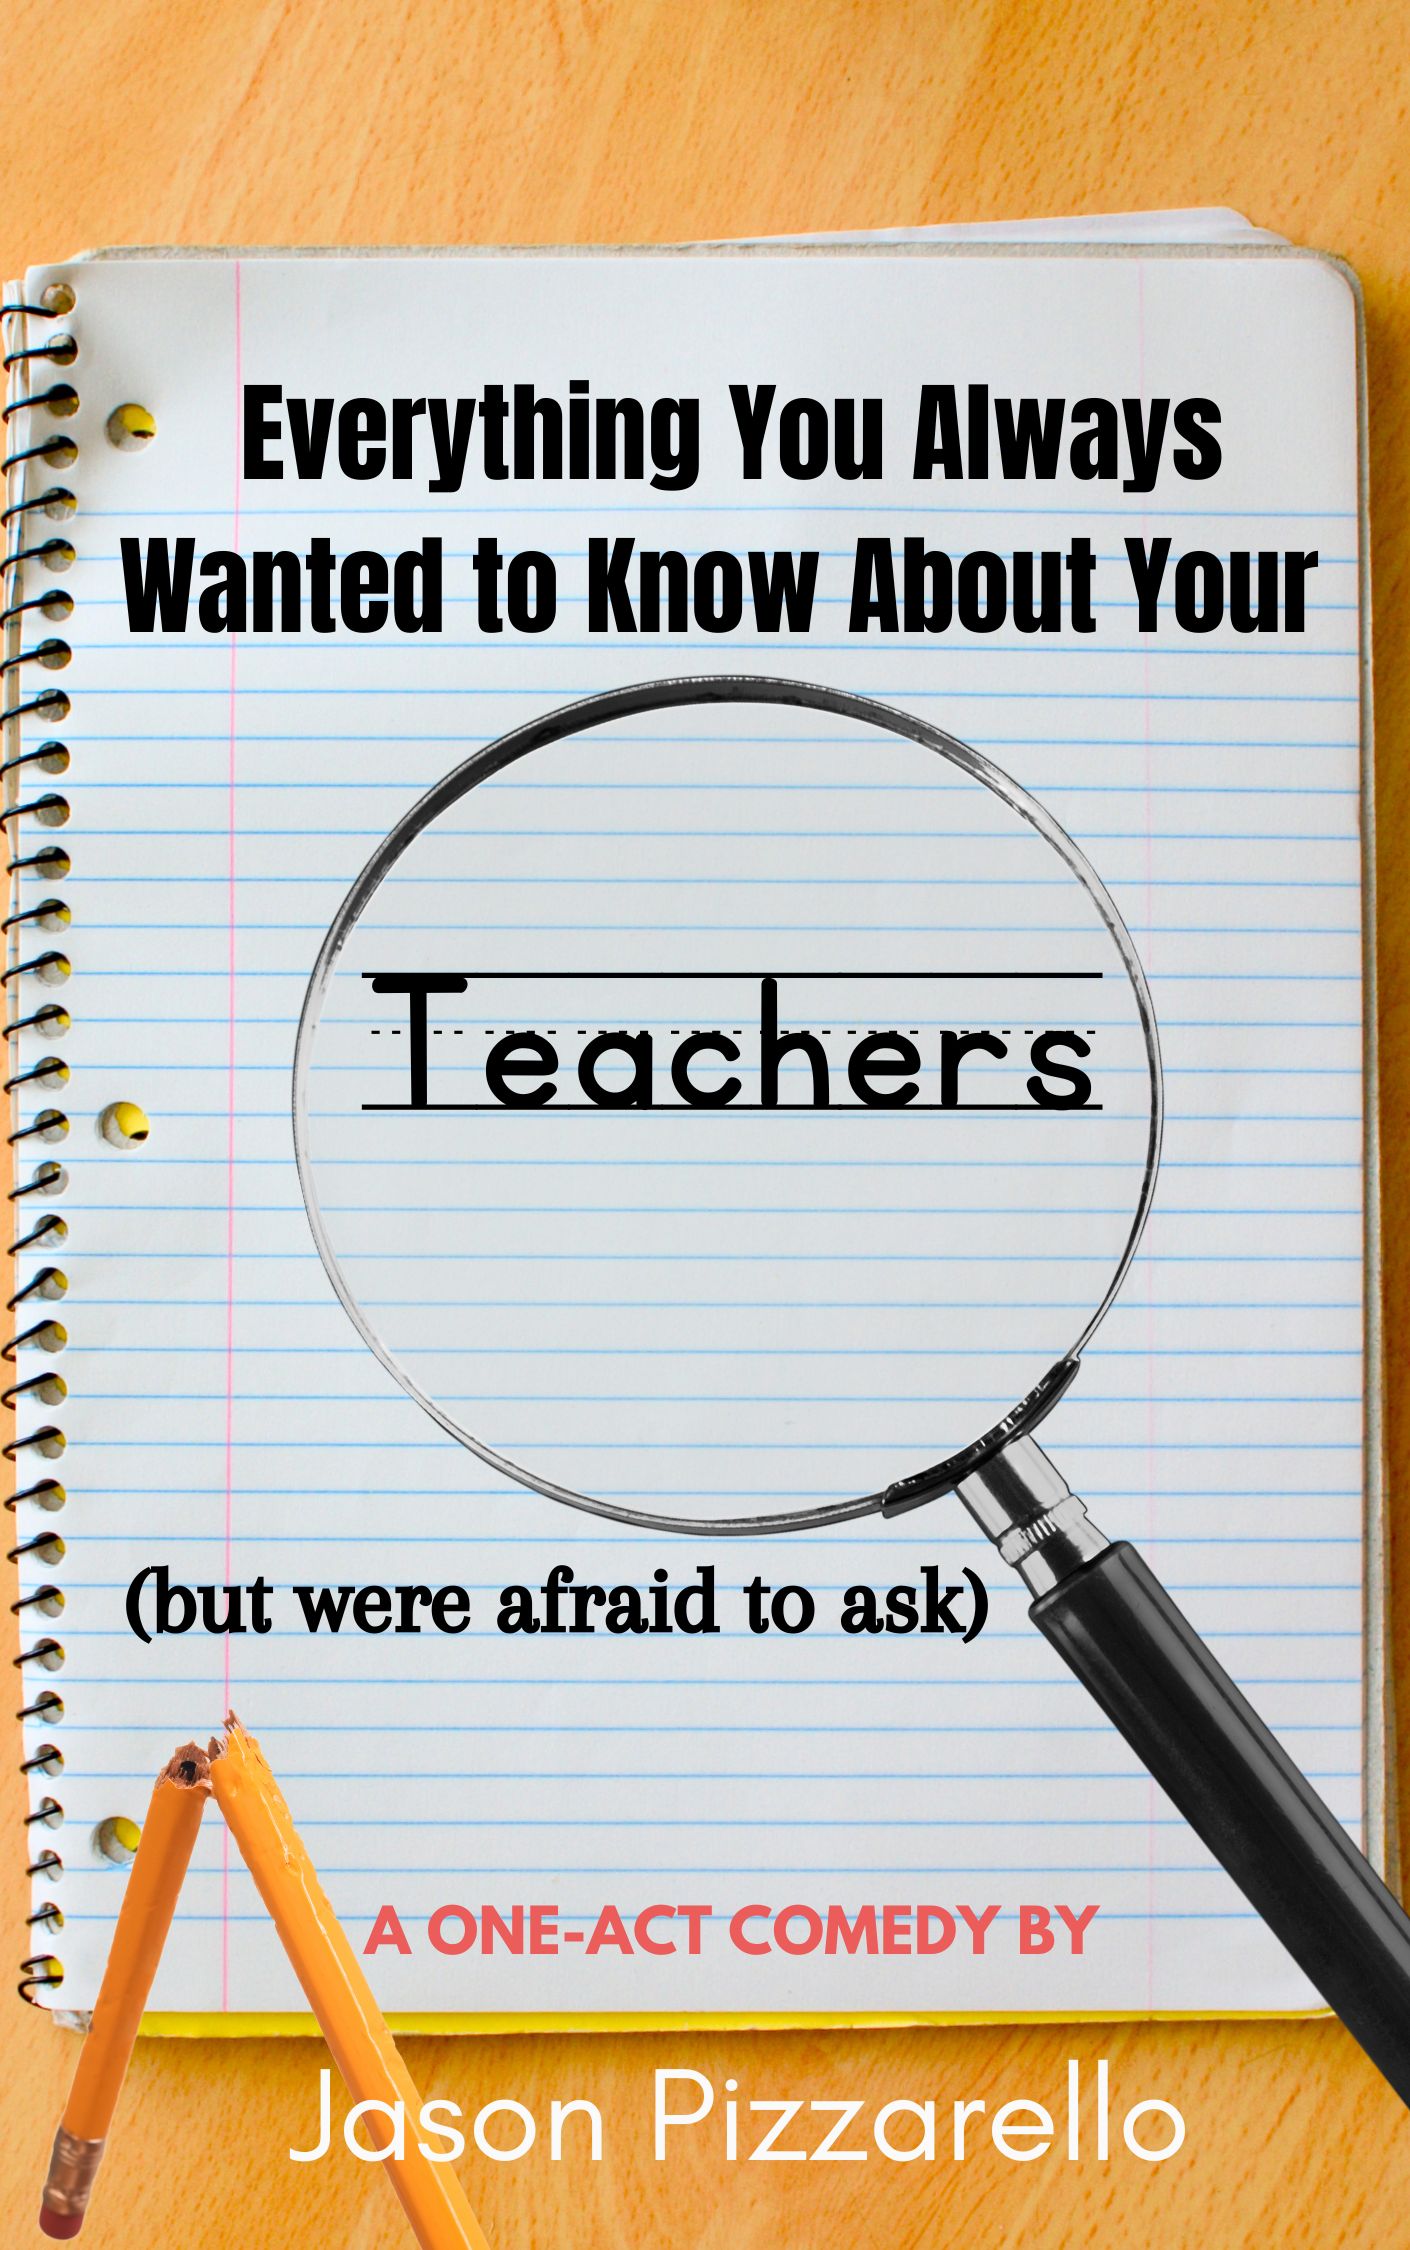 Everything You Always Wanted to Know About Your Teachers... one-act play comedy